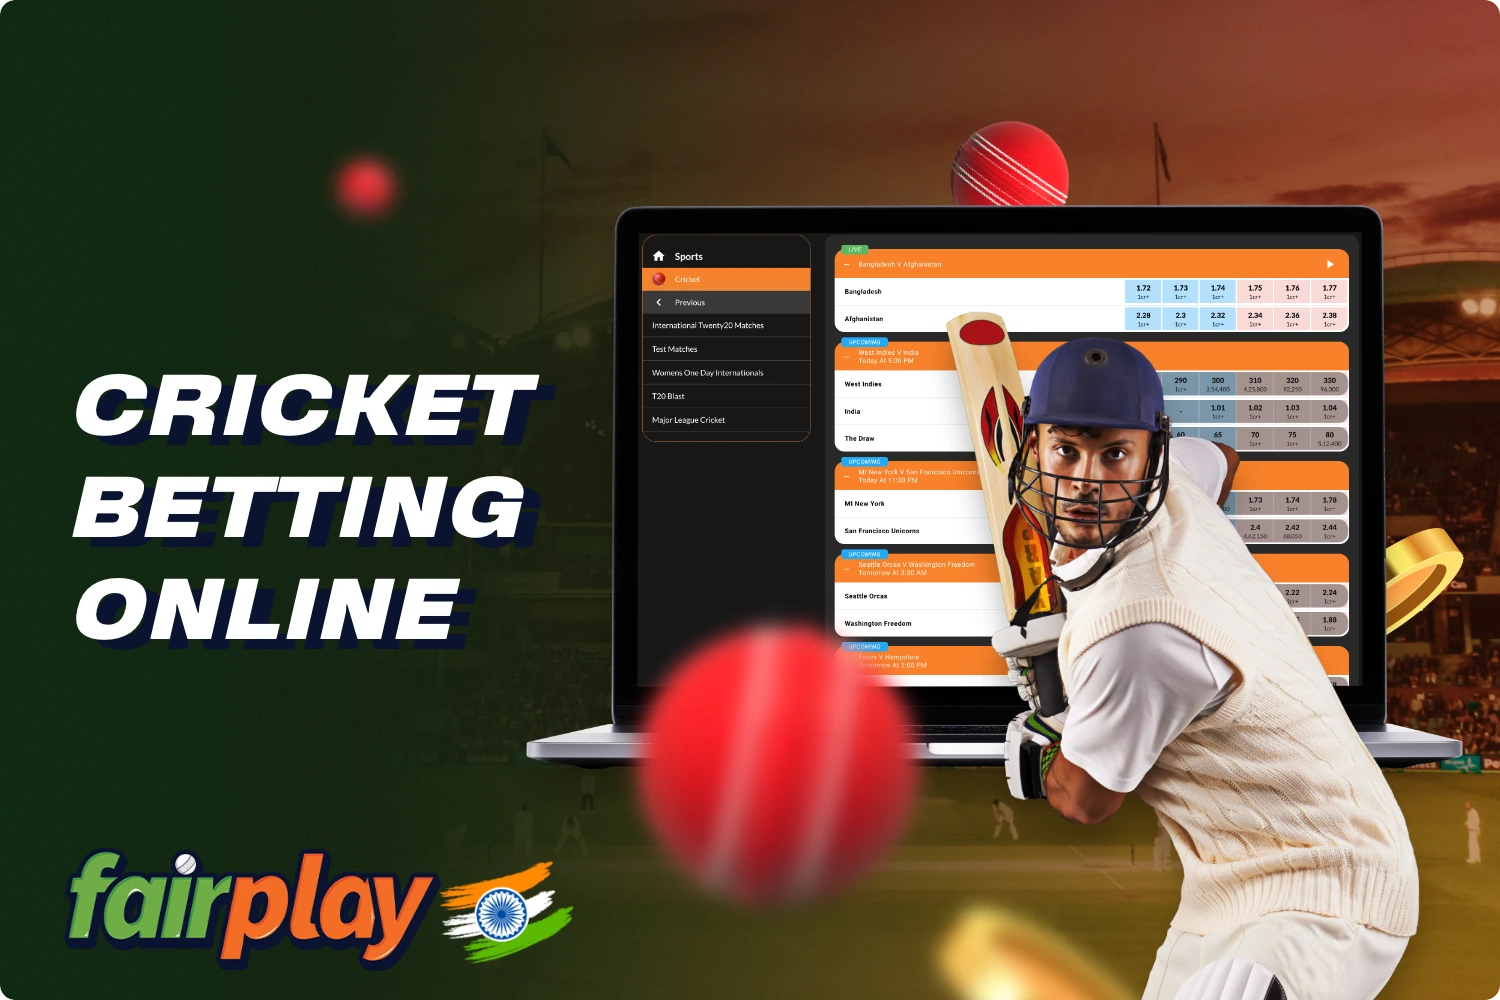 The Fairplay platform offers its Indian users a variety of cricket betting options